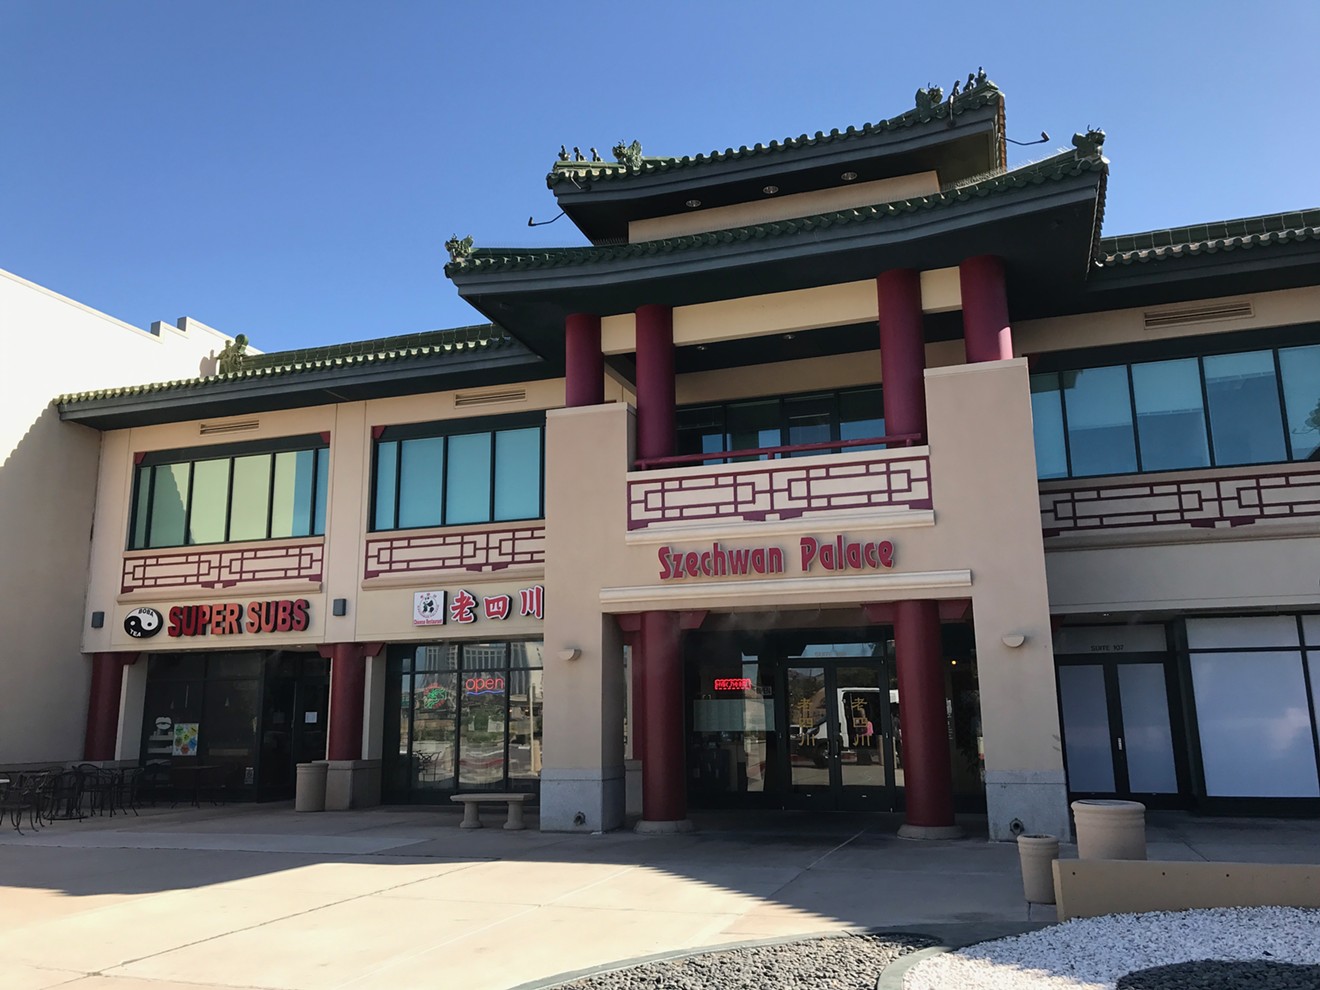 The Szechwan Palace Restaurant located at the former Chinese Cultural Center.